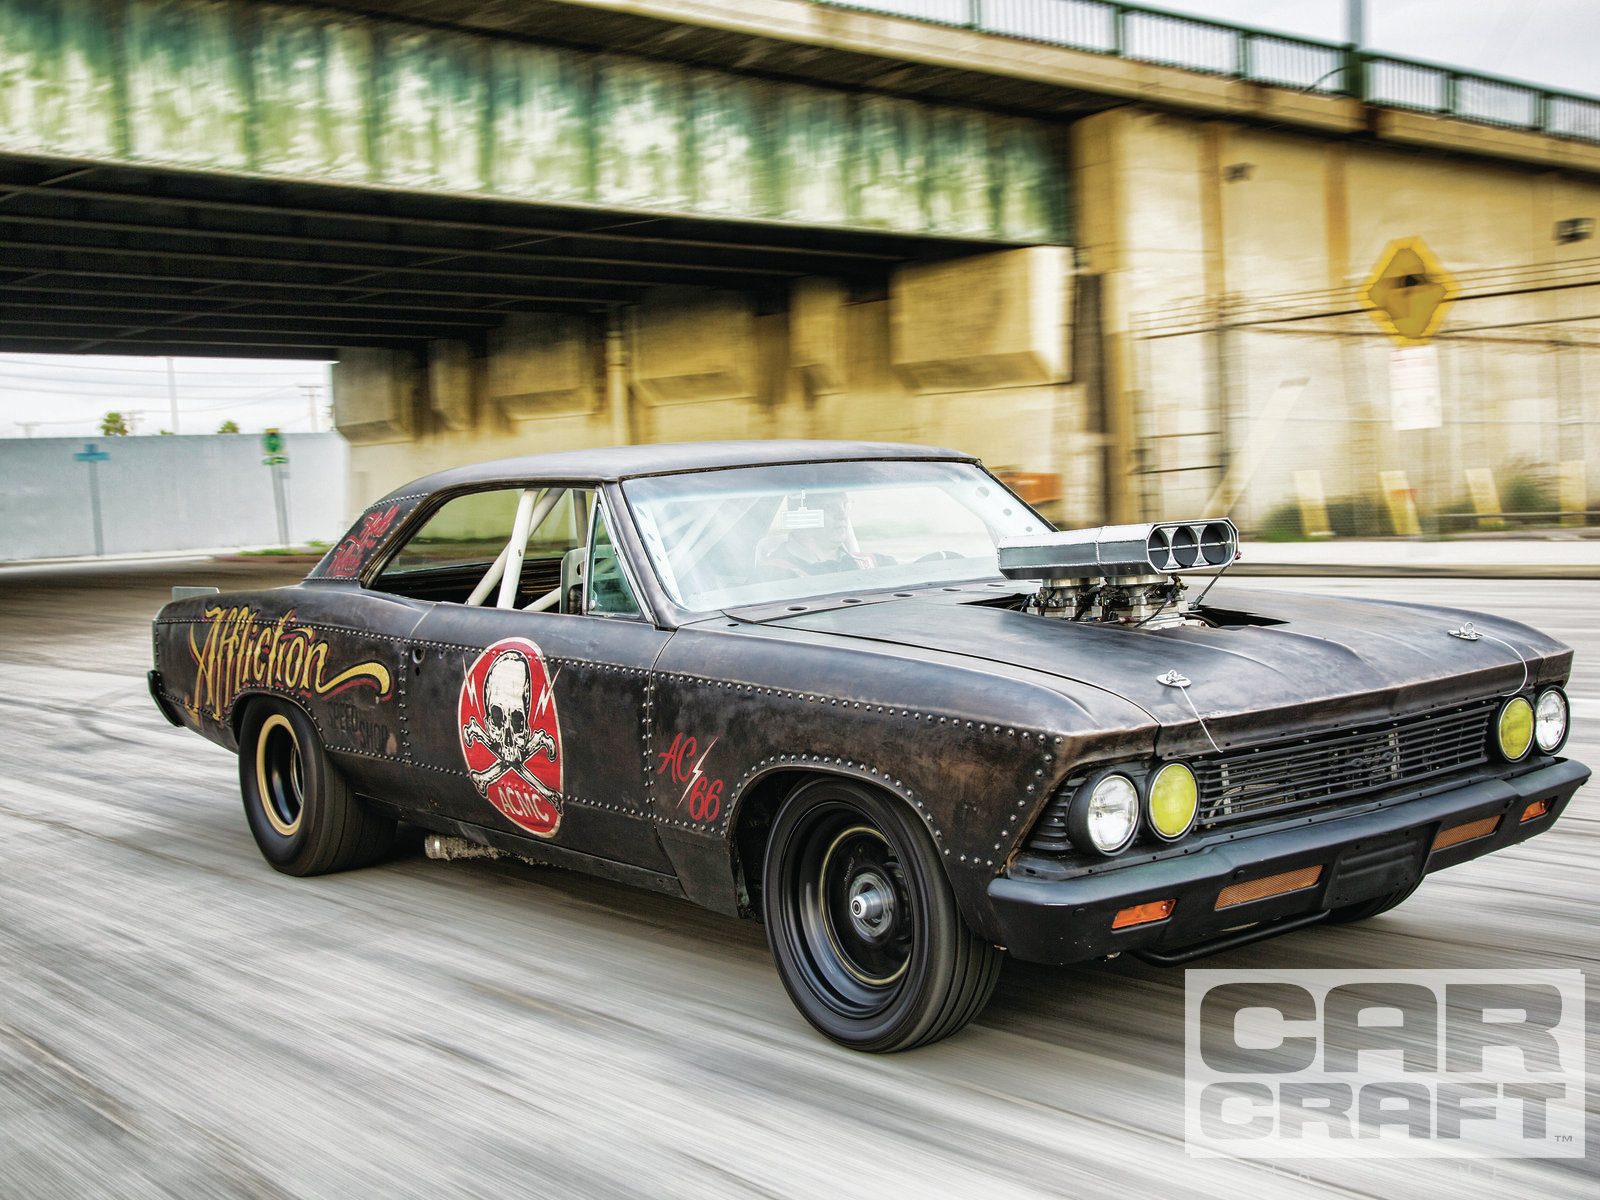 1966 Chevrolet Chevelle   The Affliction Chevelle Photo Gallery